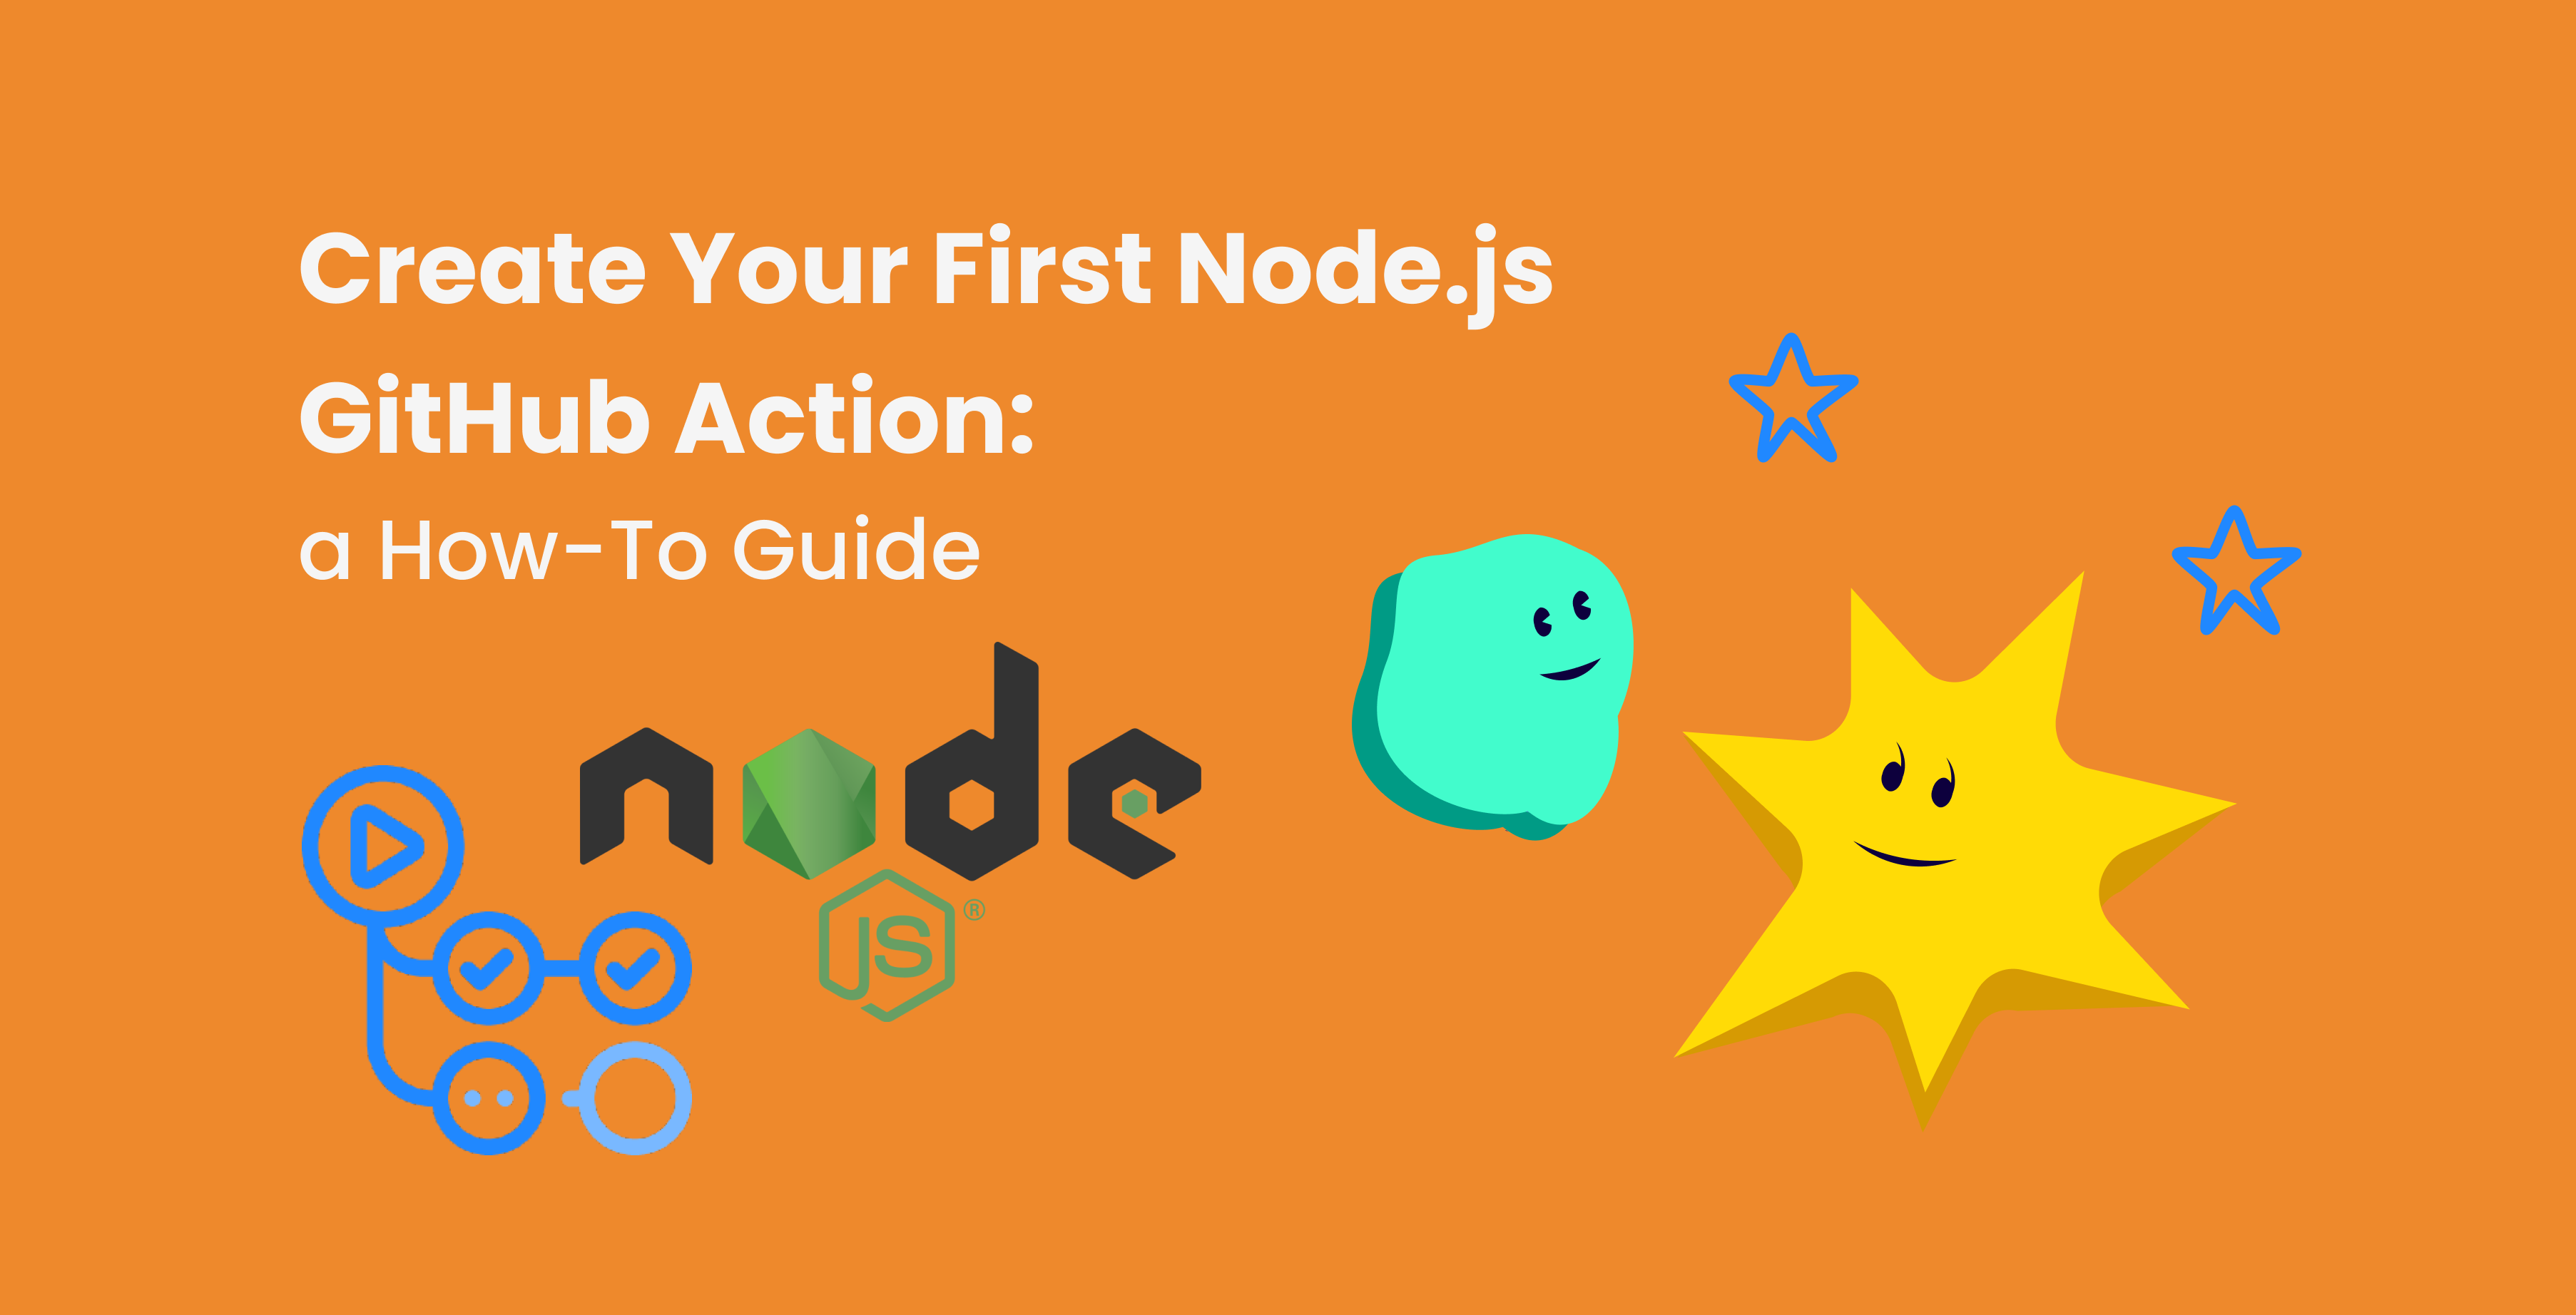 Create Your First Node.js GitHub Action: a How-To Guide